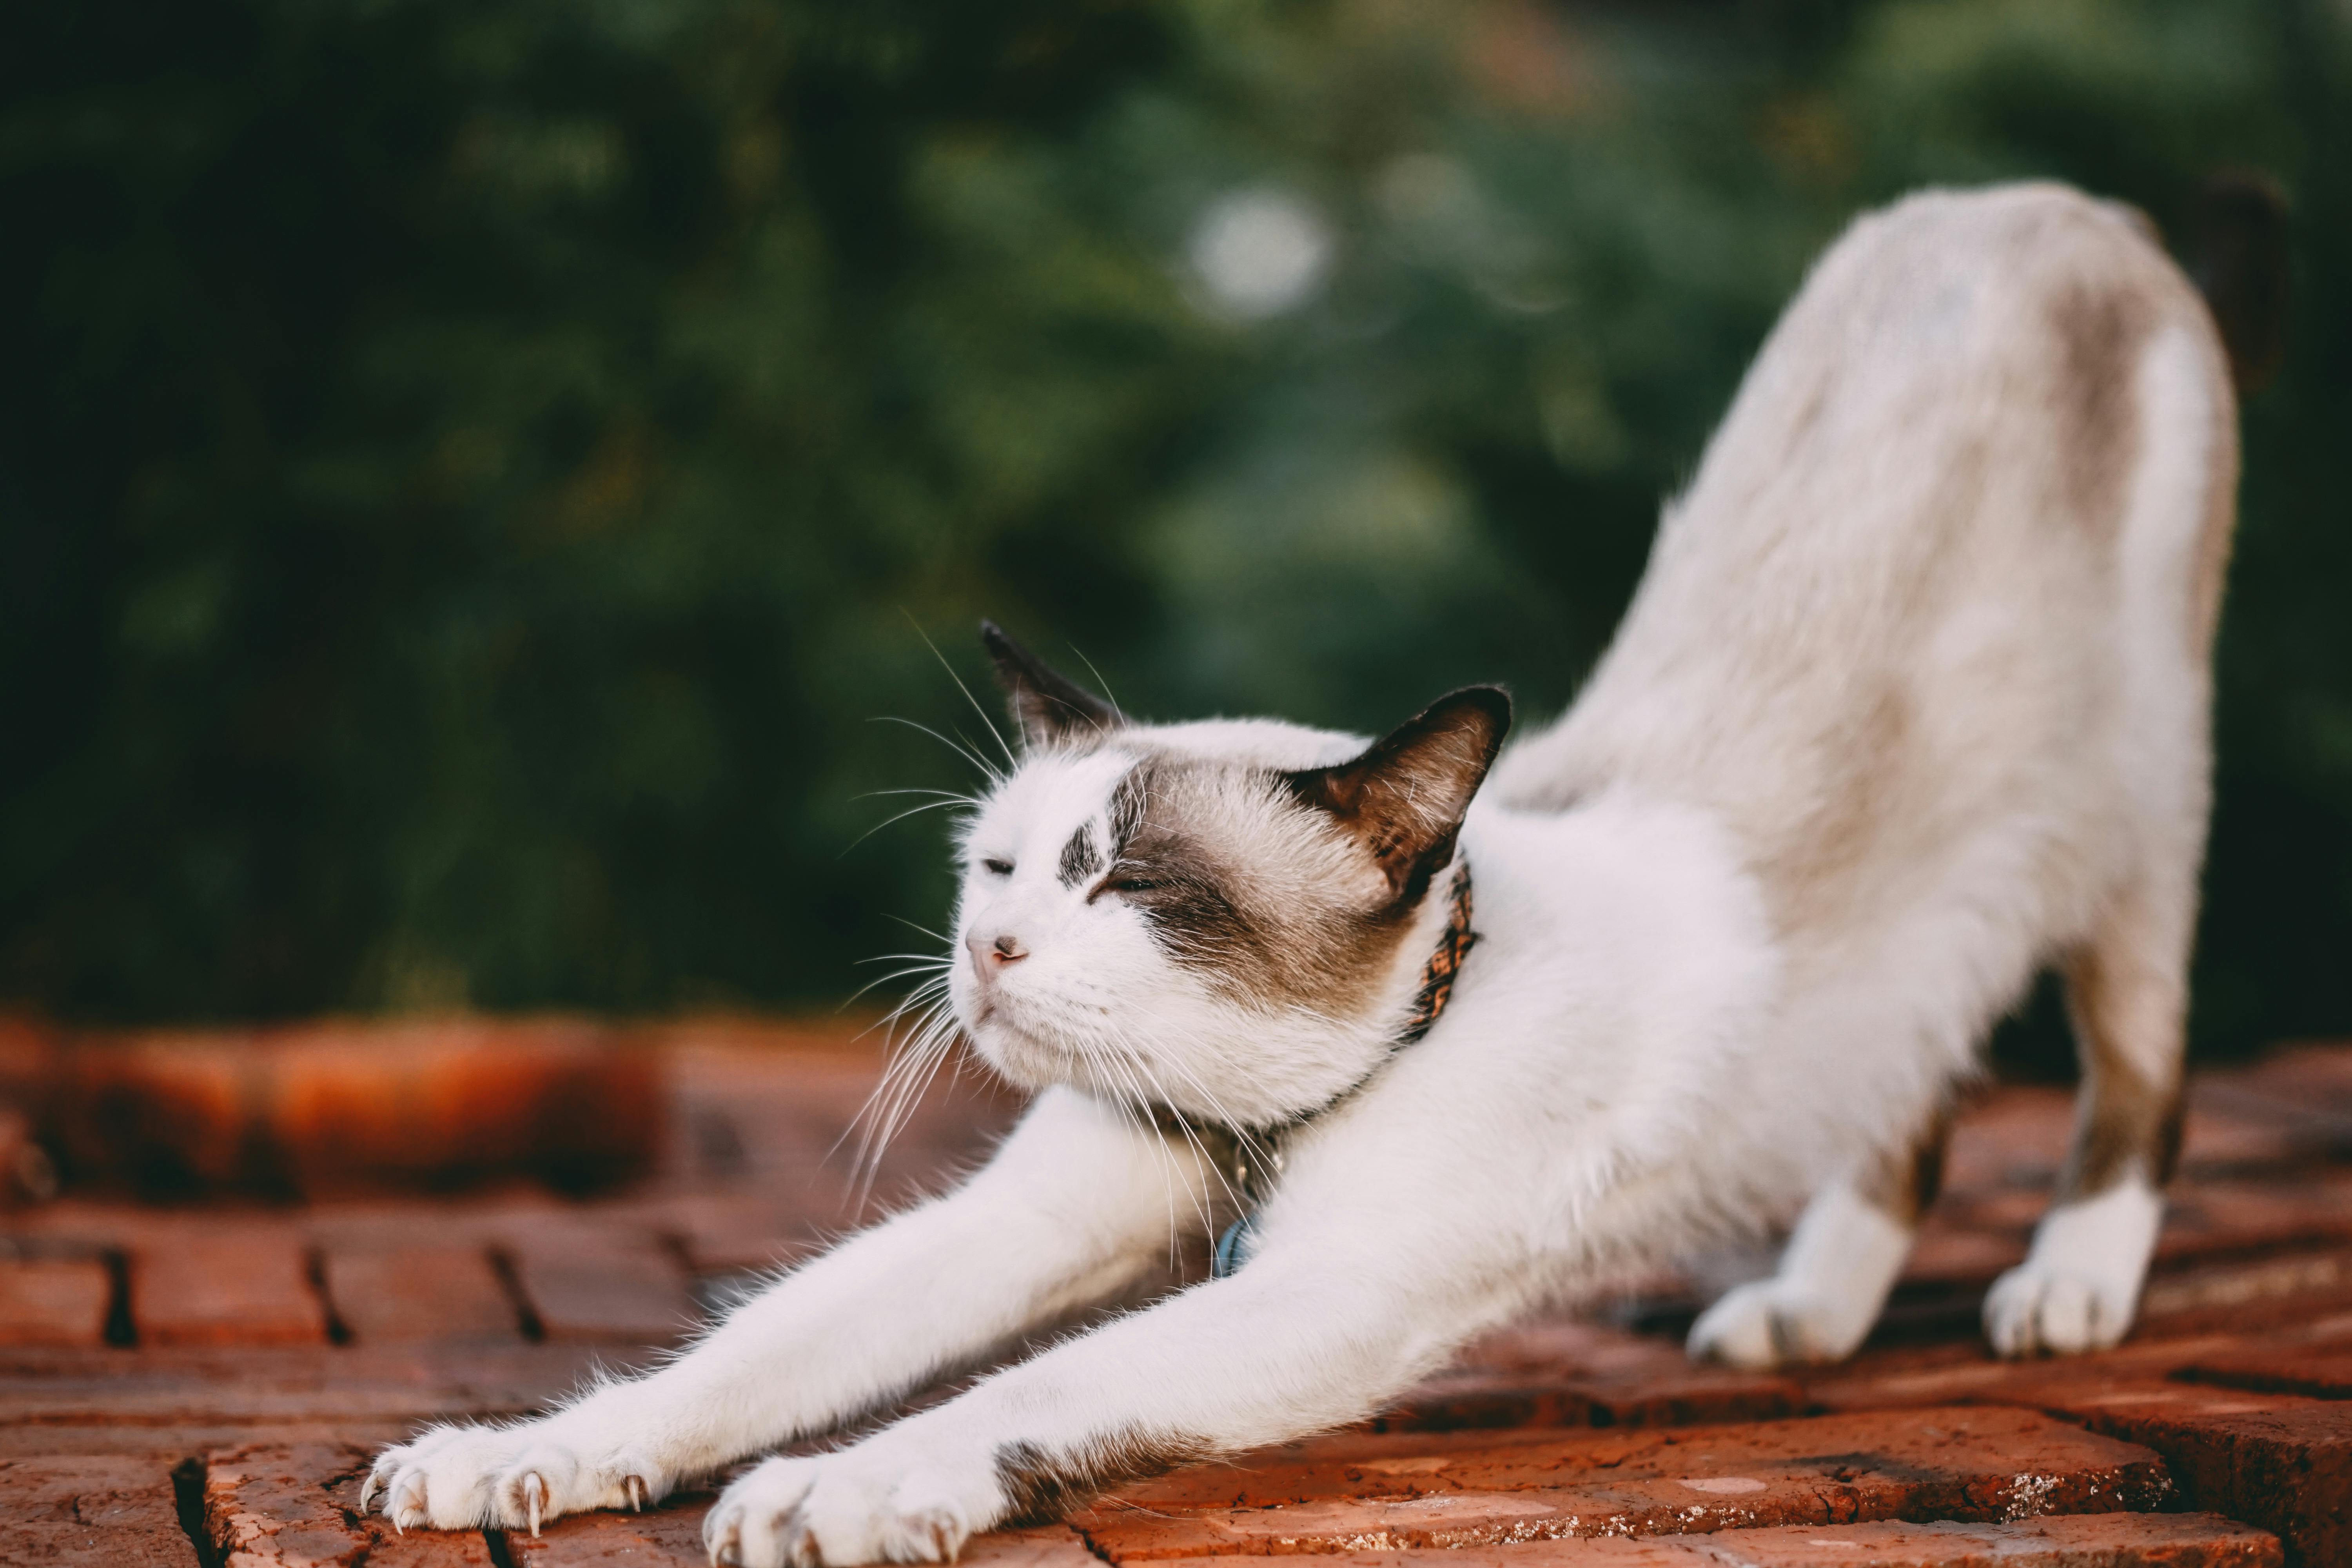 A white cat is stretching in a downward facing dog positions.